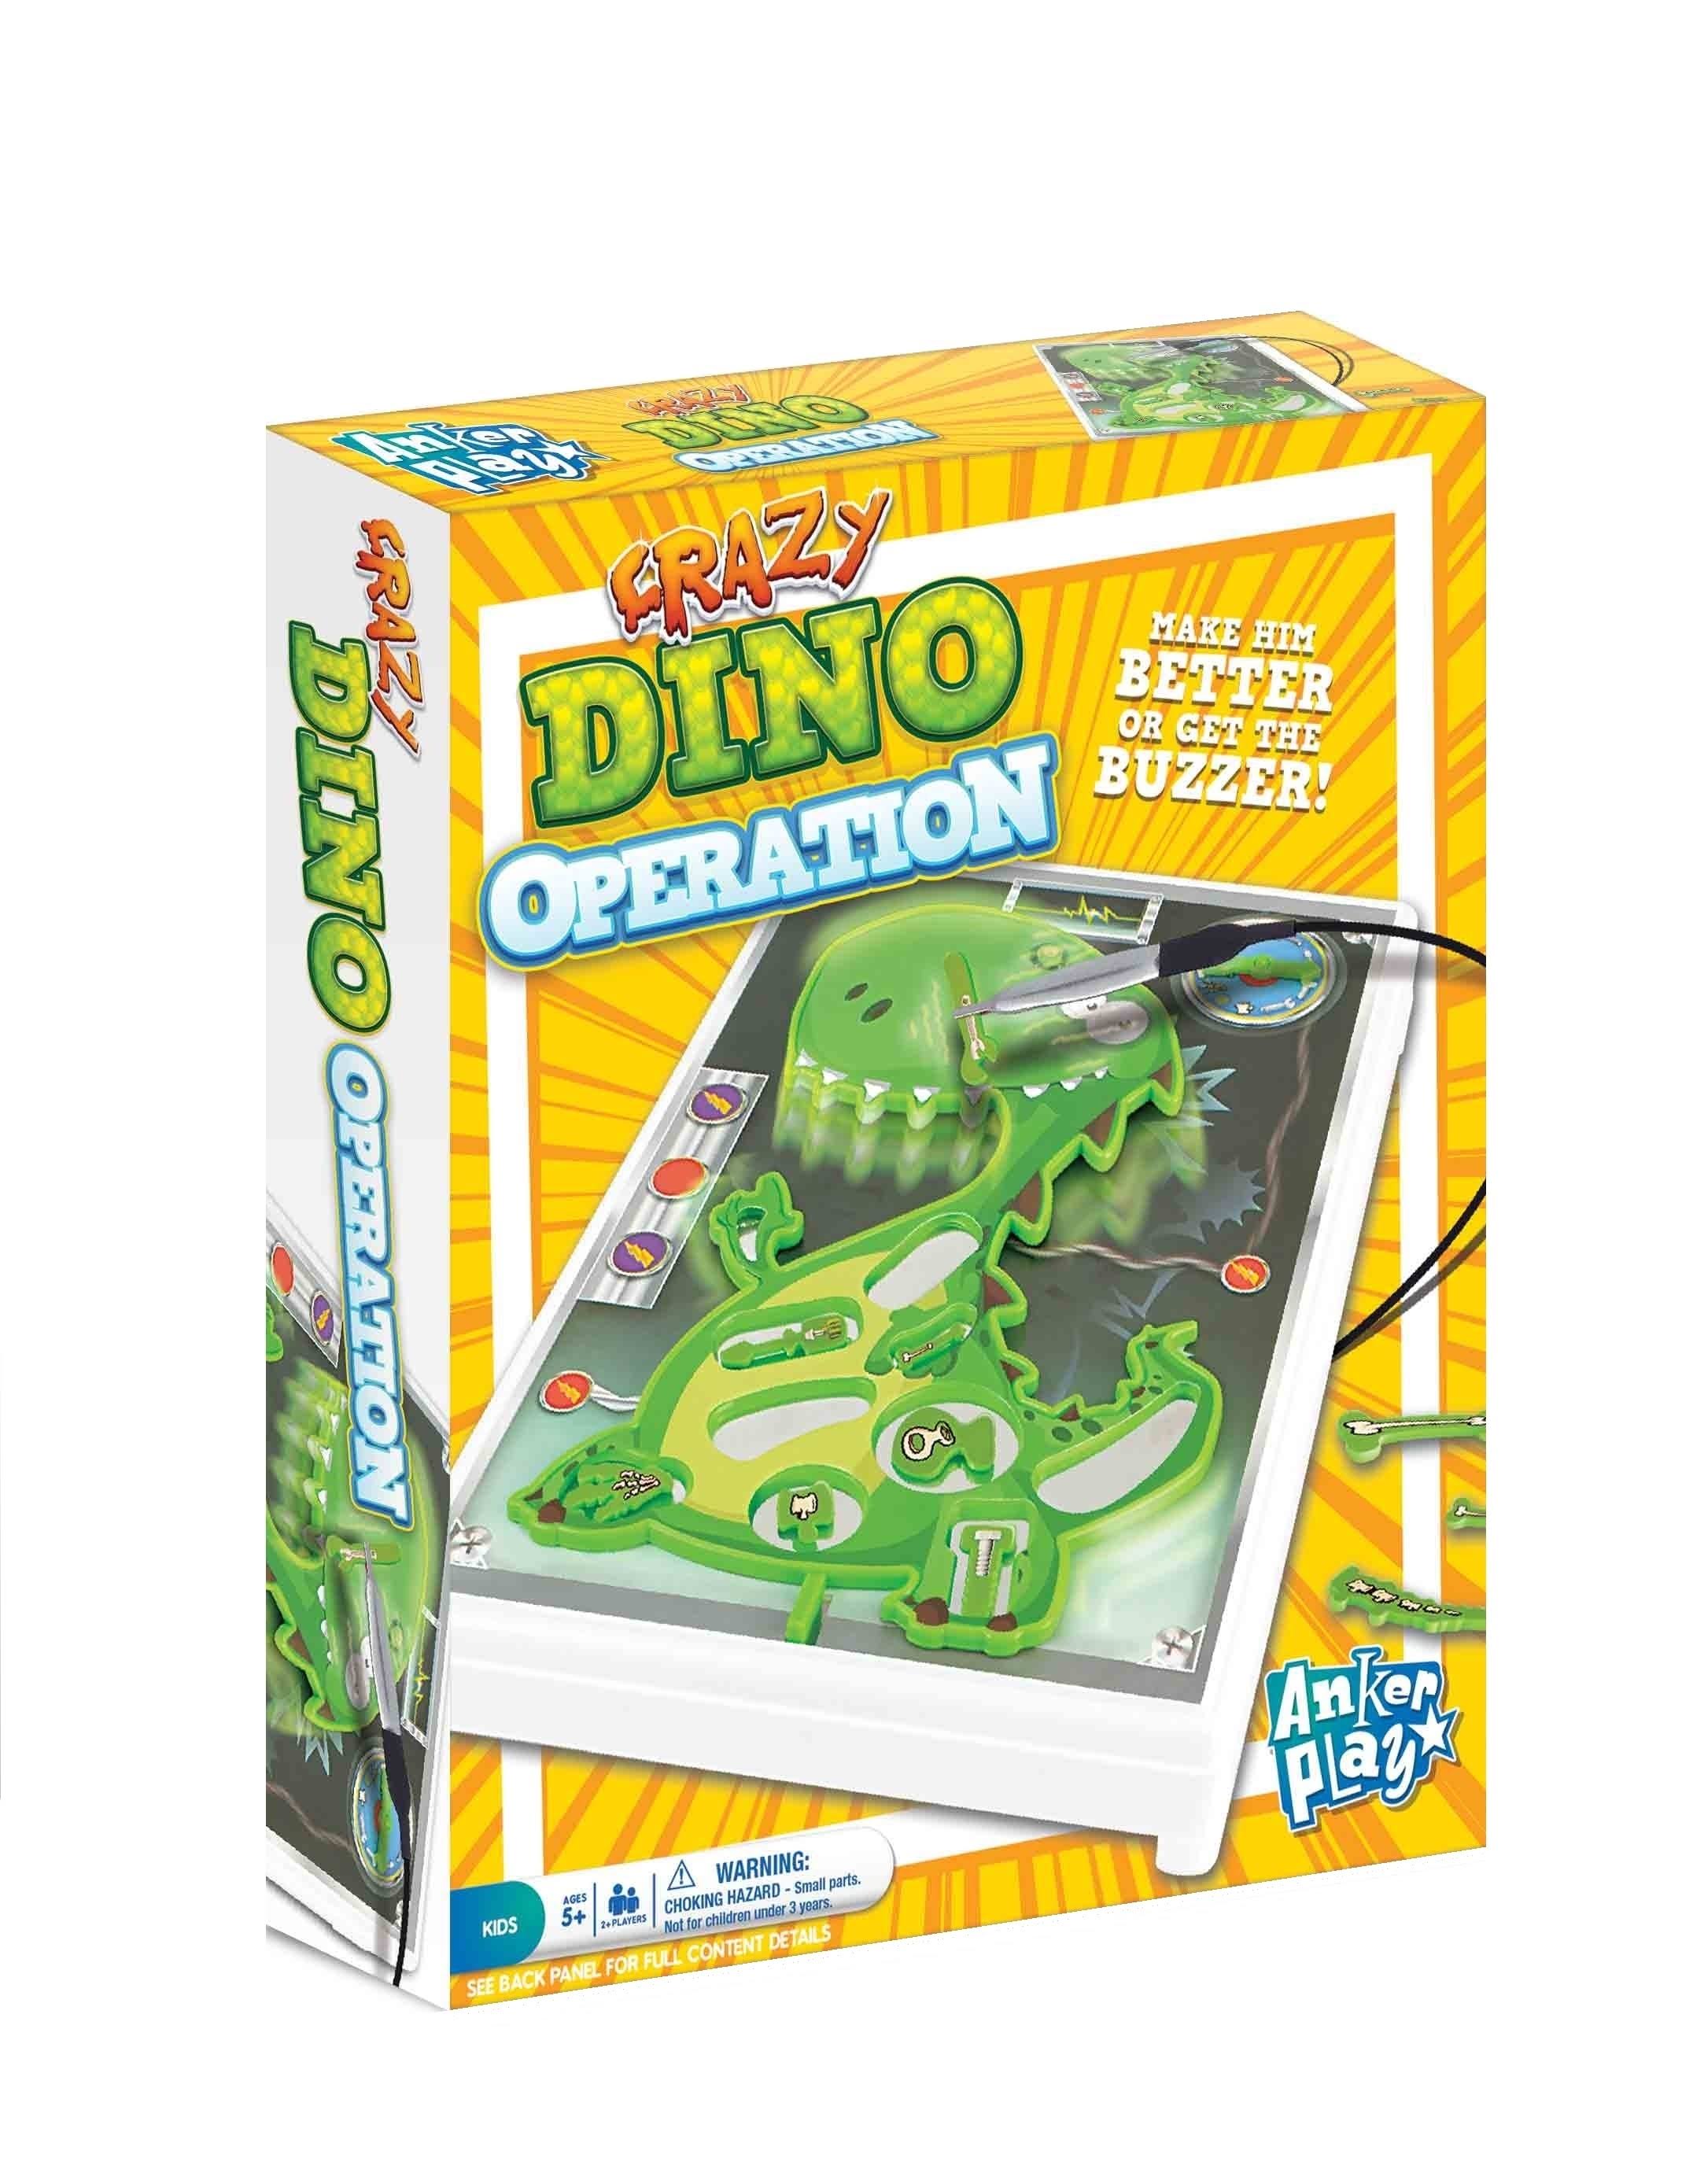 Anker Play Dino Dissection Game